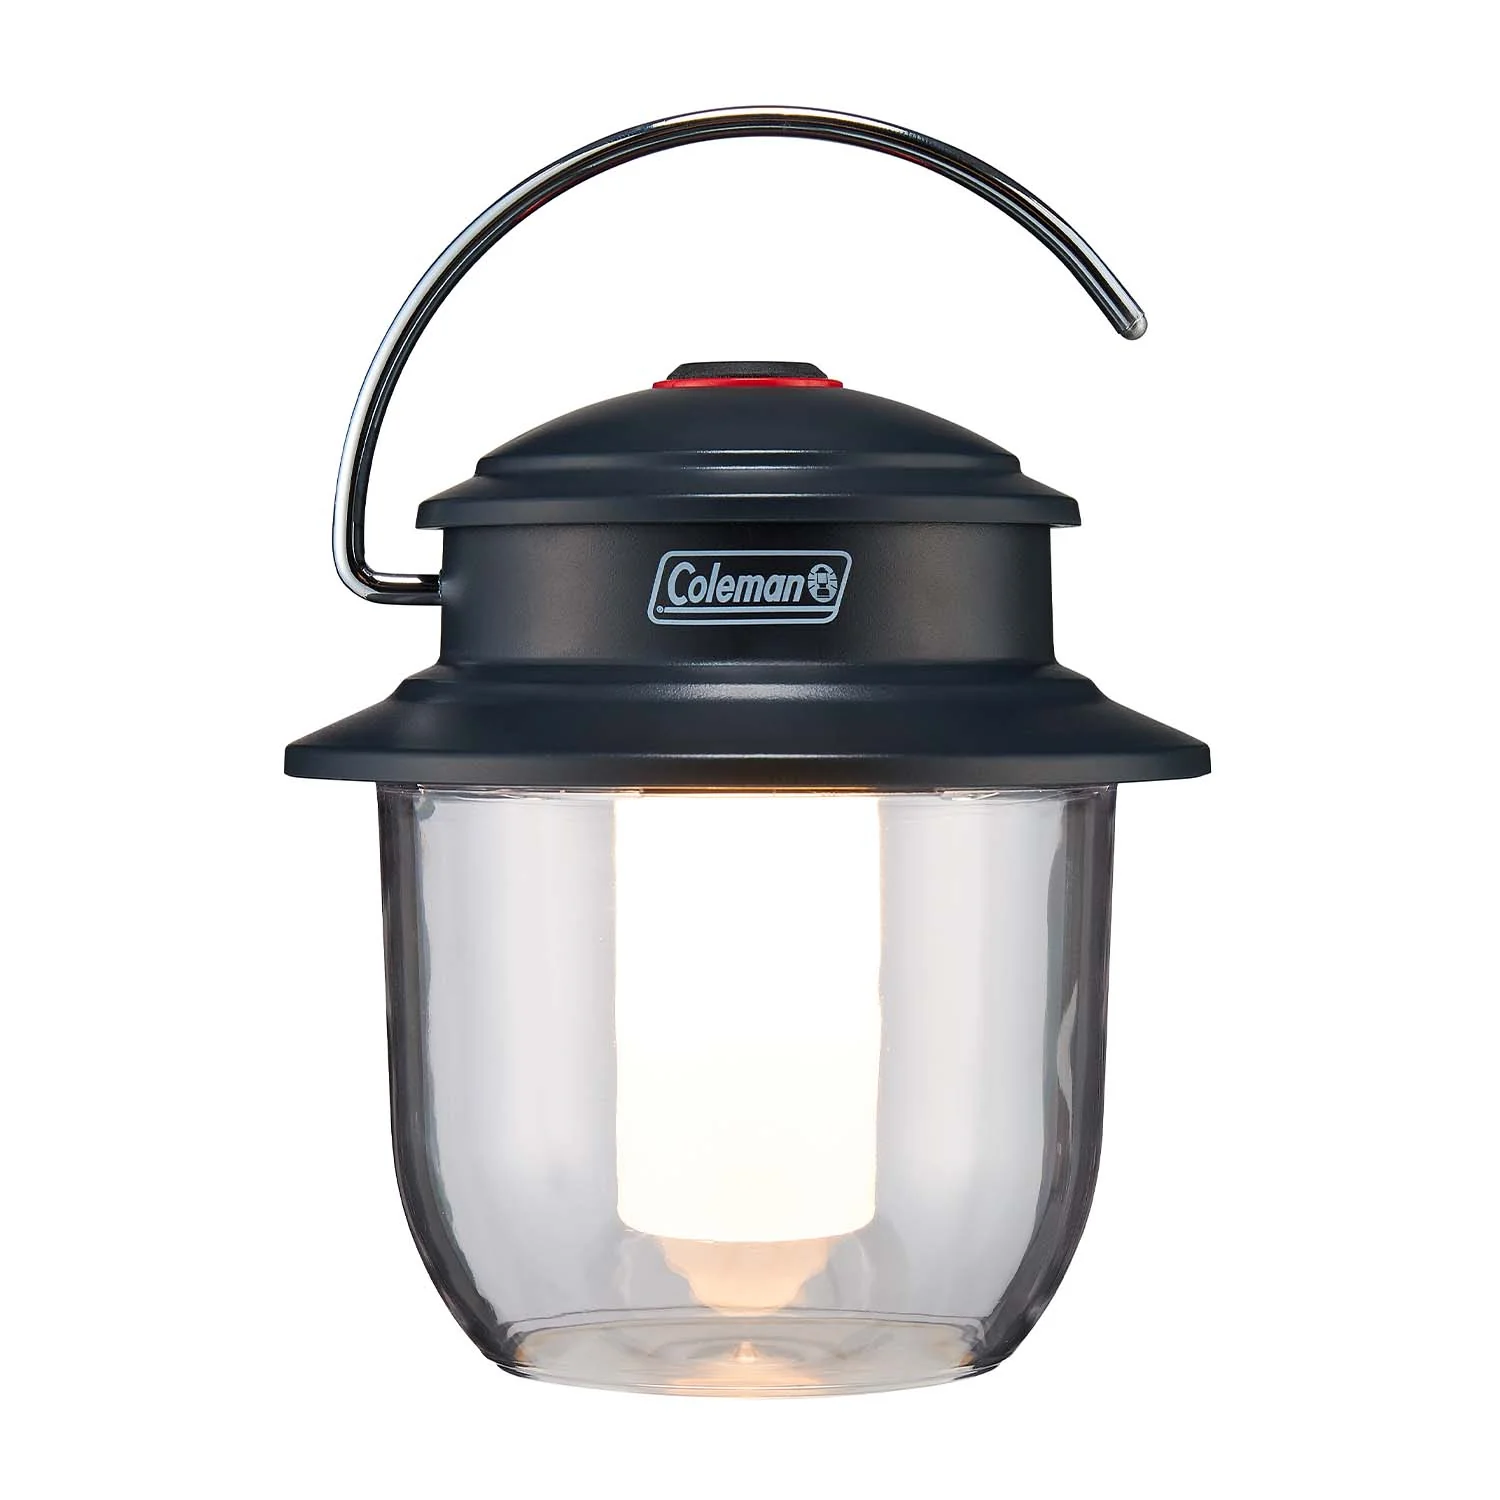 COLEMAN RECHARGEABLE HANGING LANTERN